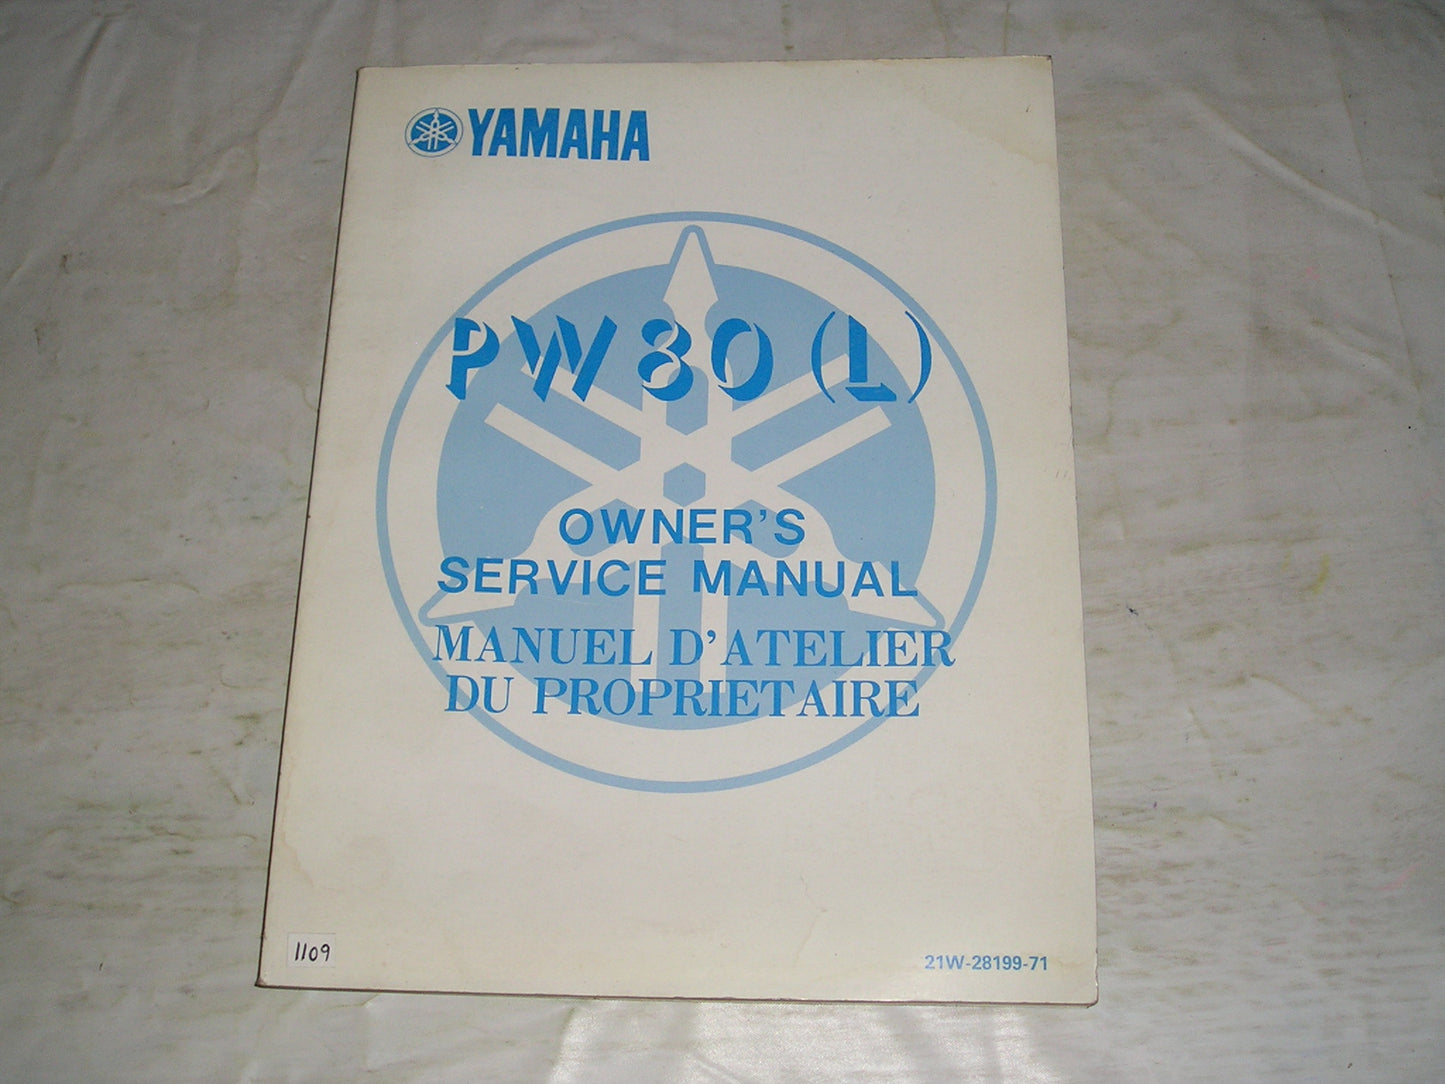 YAMAHA PW80 L  1984  Owner's Service Manual  21W-28199-71  #1109